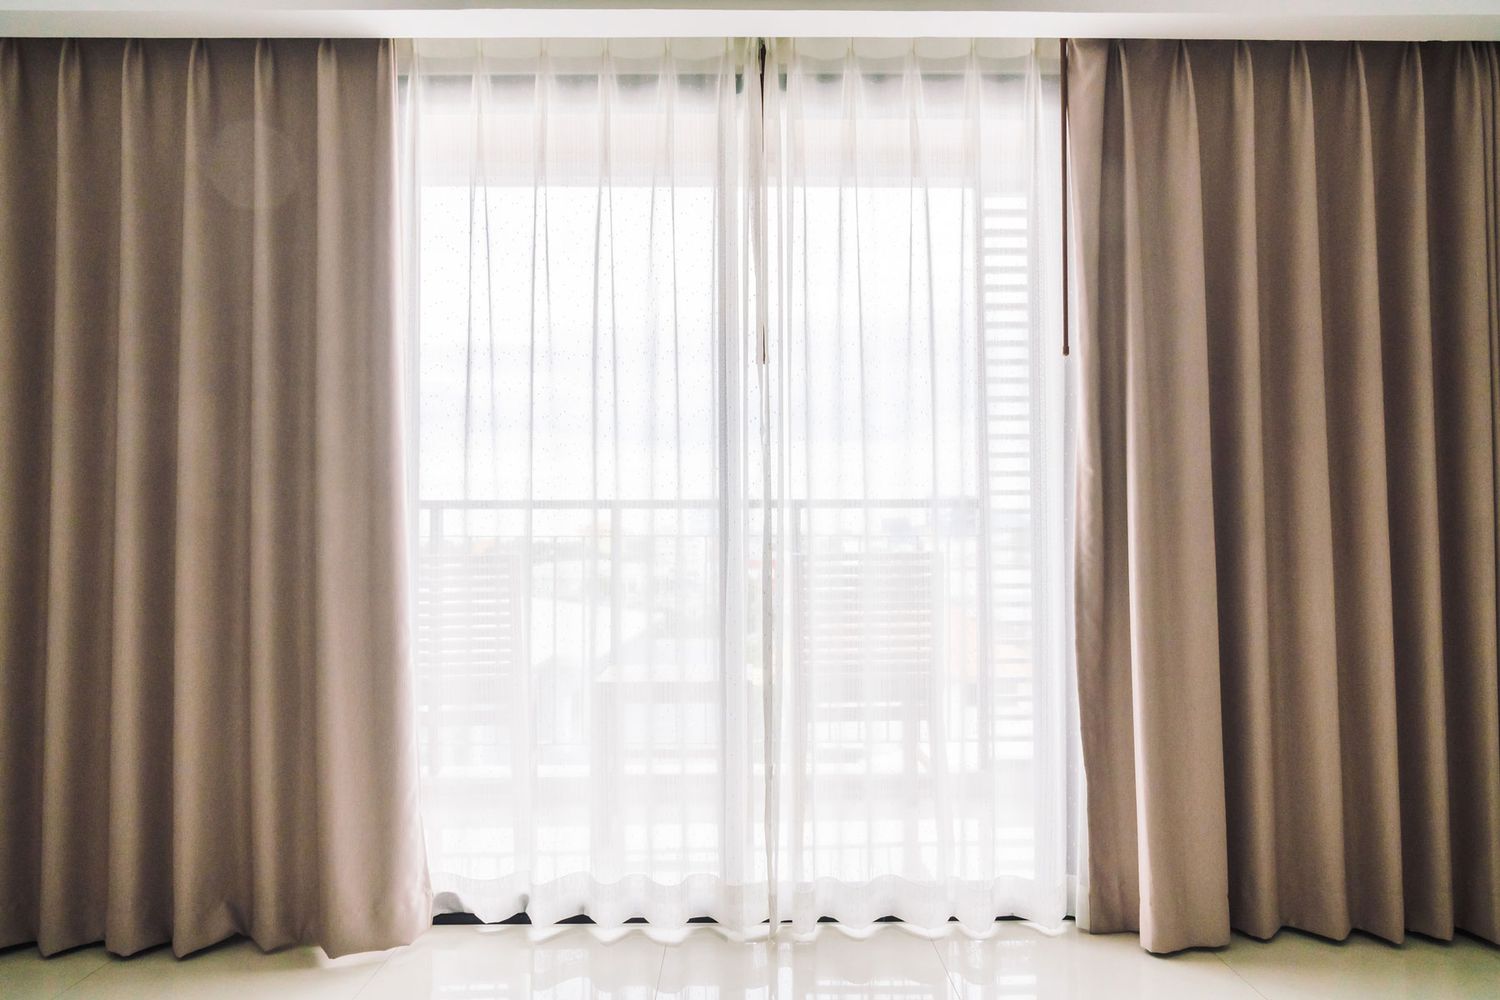 Guide To Curtains And Window Treatments Real Simple,Longaberger Basket Headquarters Newark Ohio